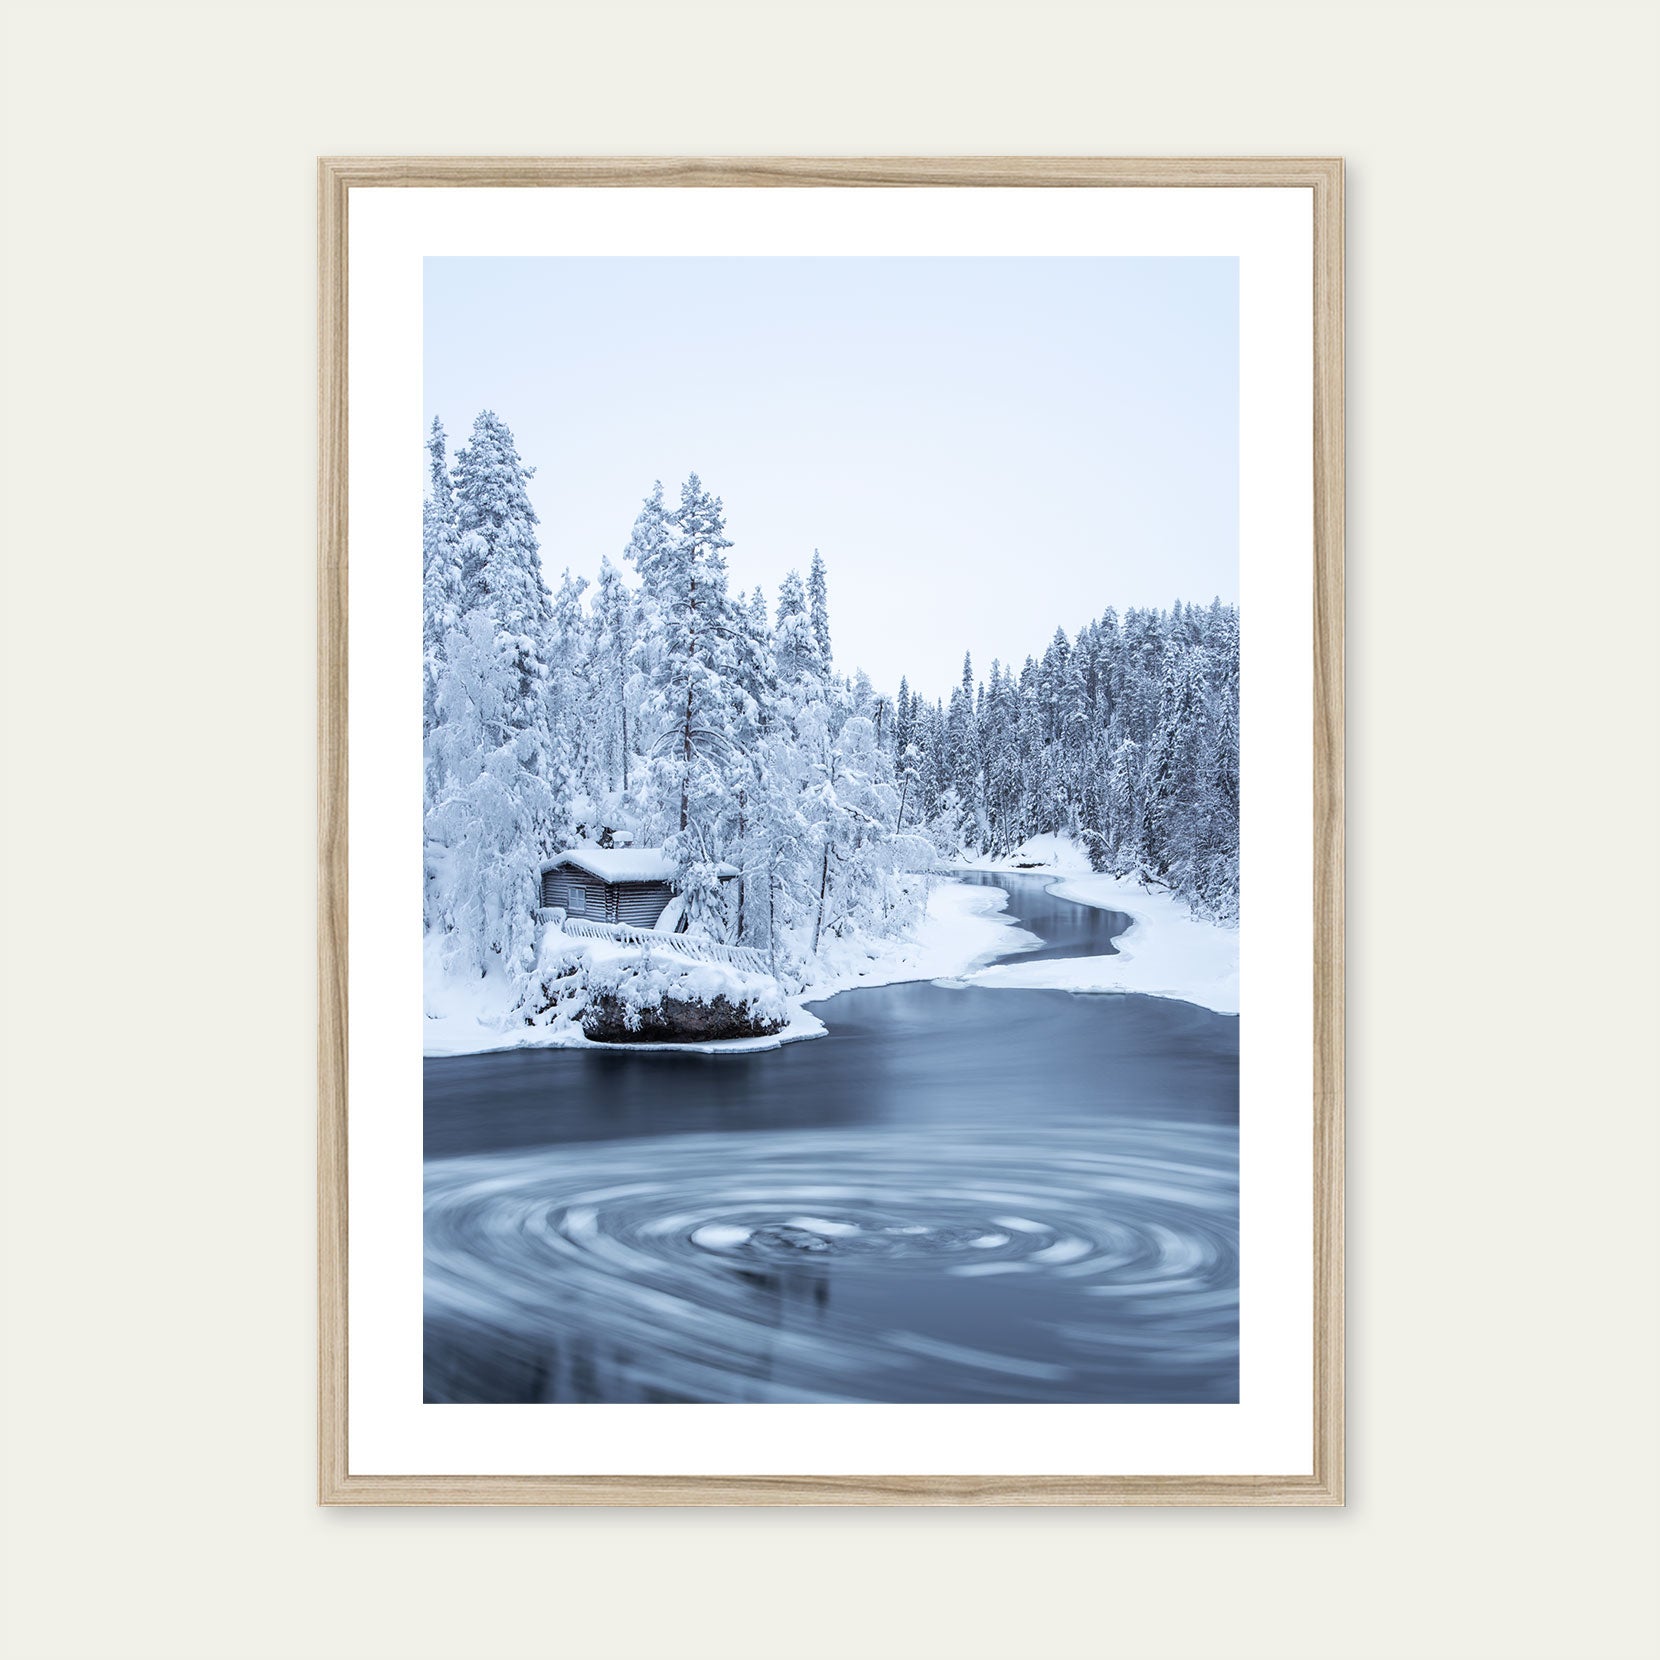 A wood framed print of a wooden hut in winter forest